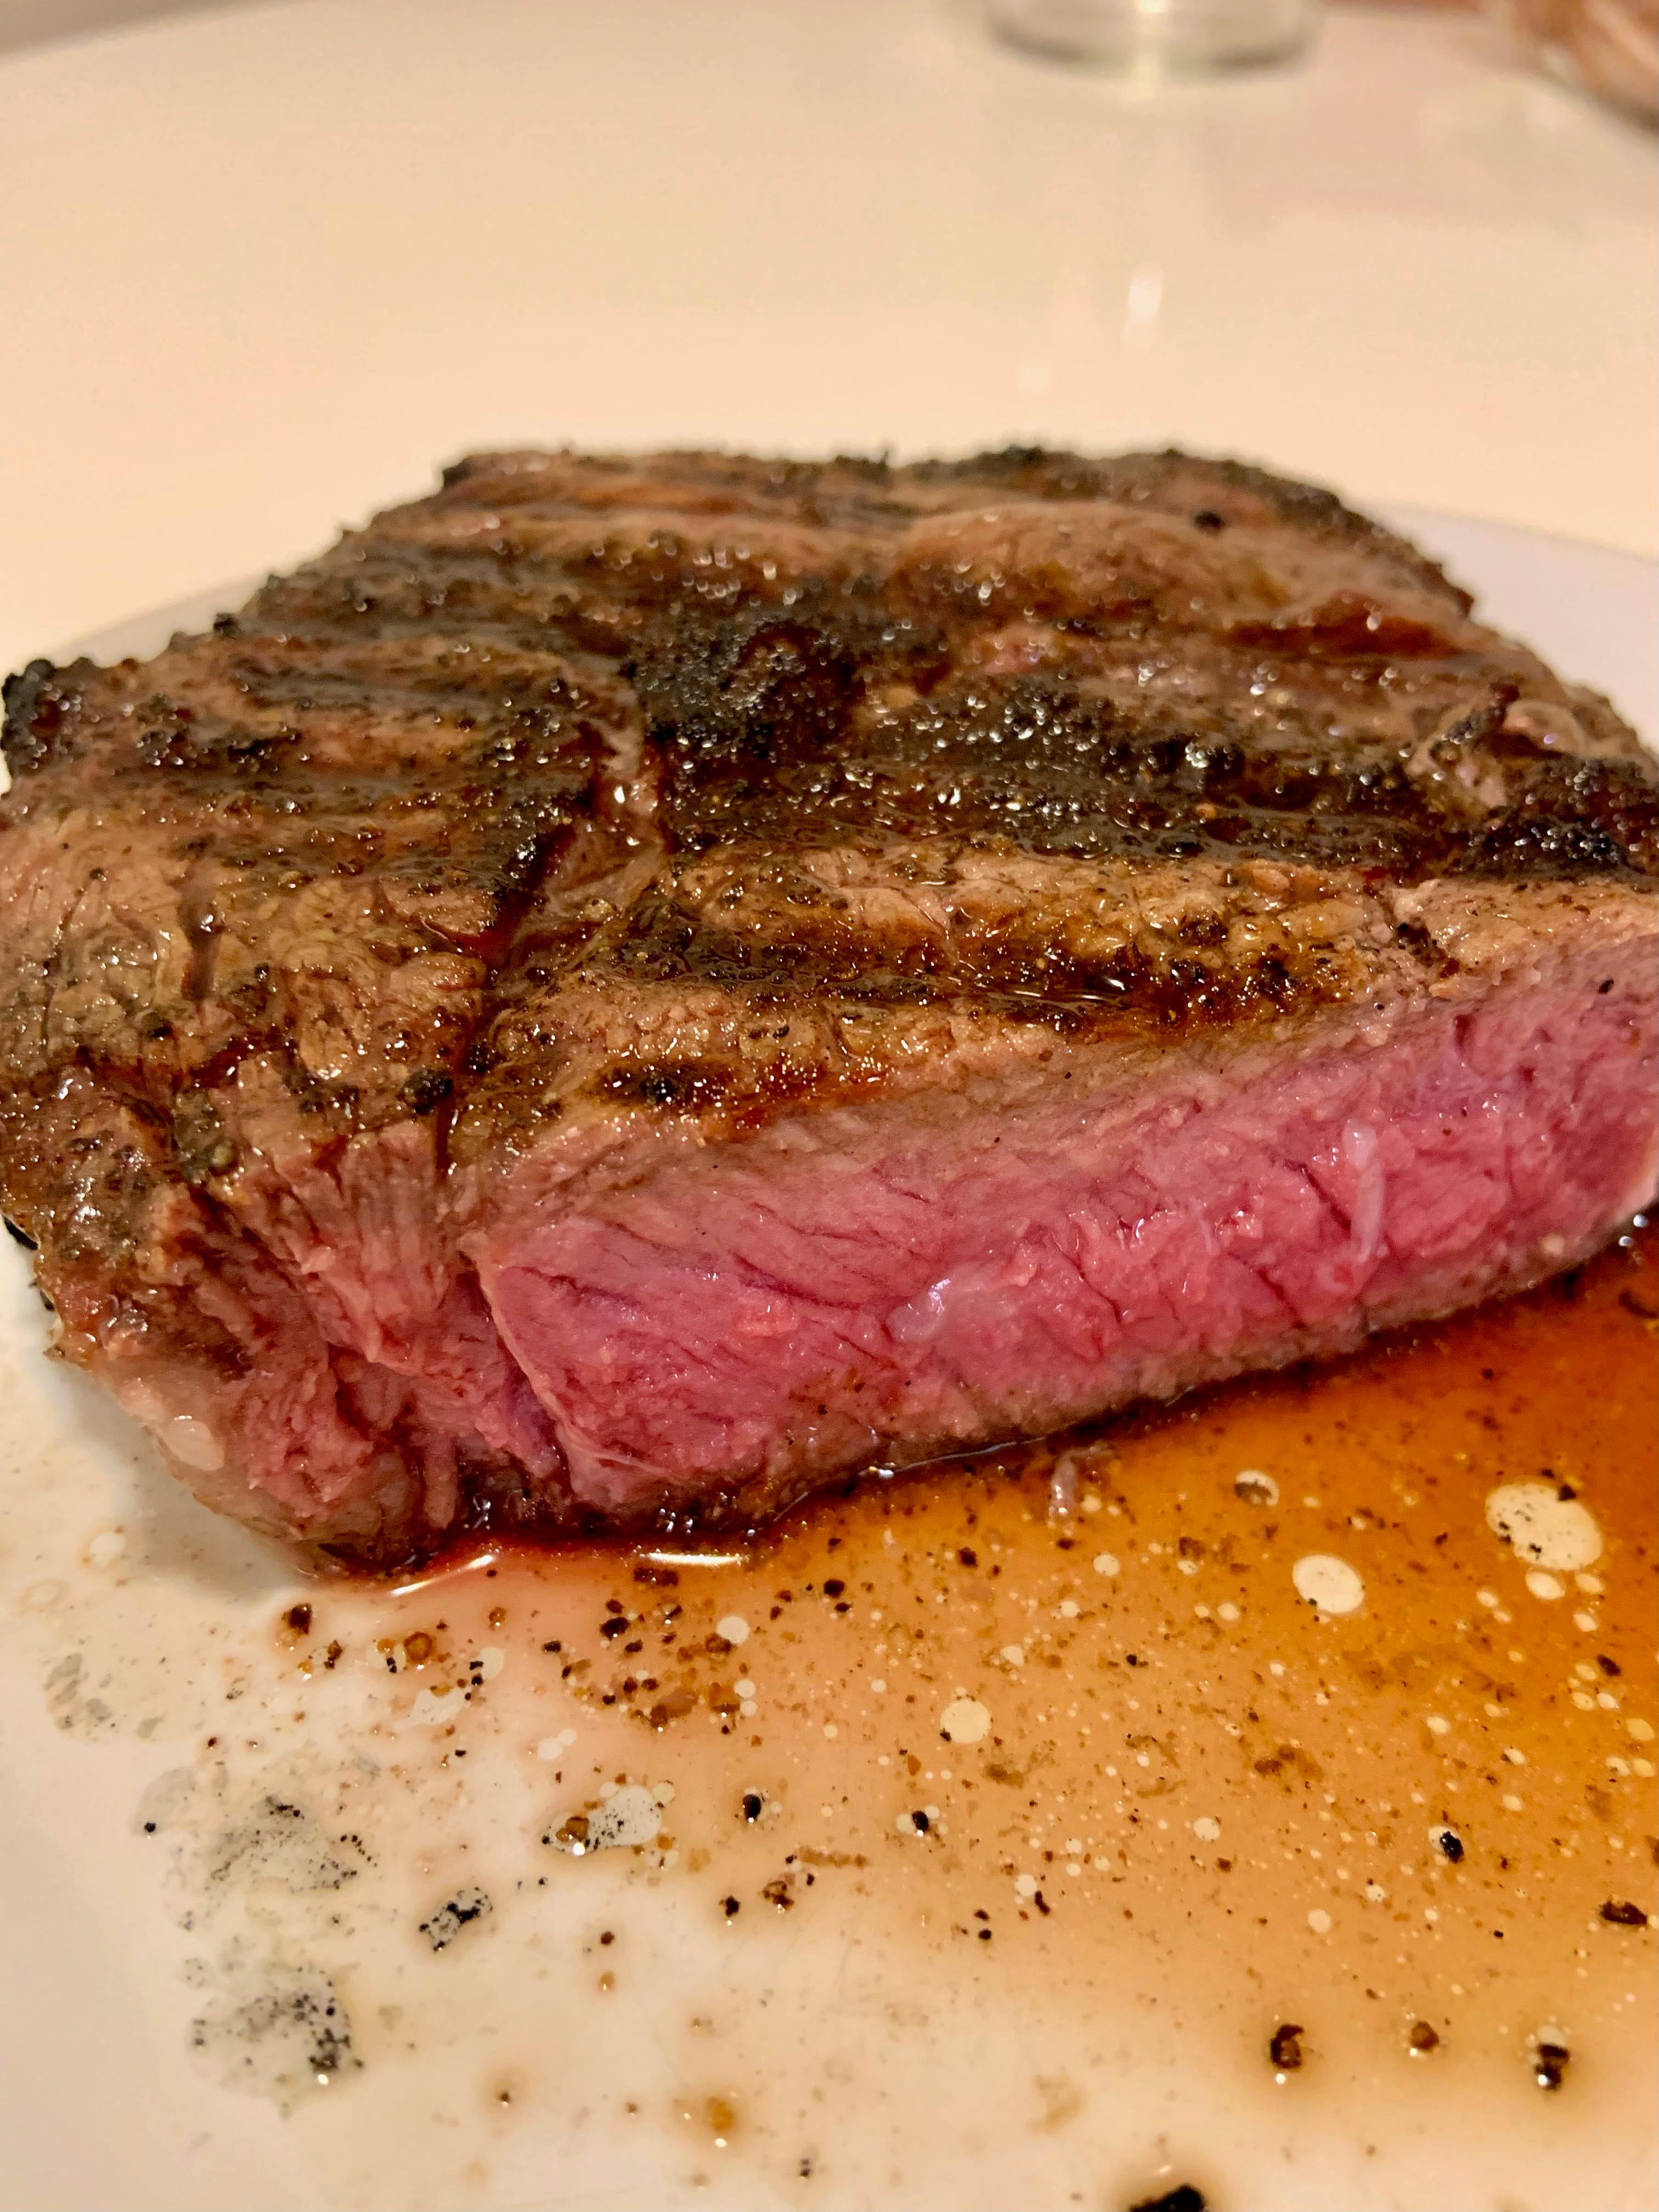 1.5” Costco AAA ribeye. Pretty happy with how it turned out on my ...